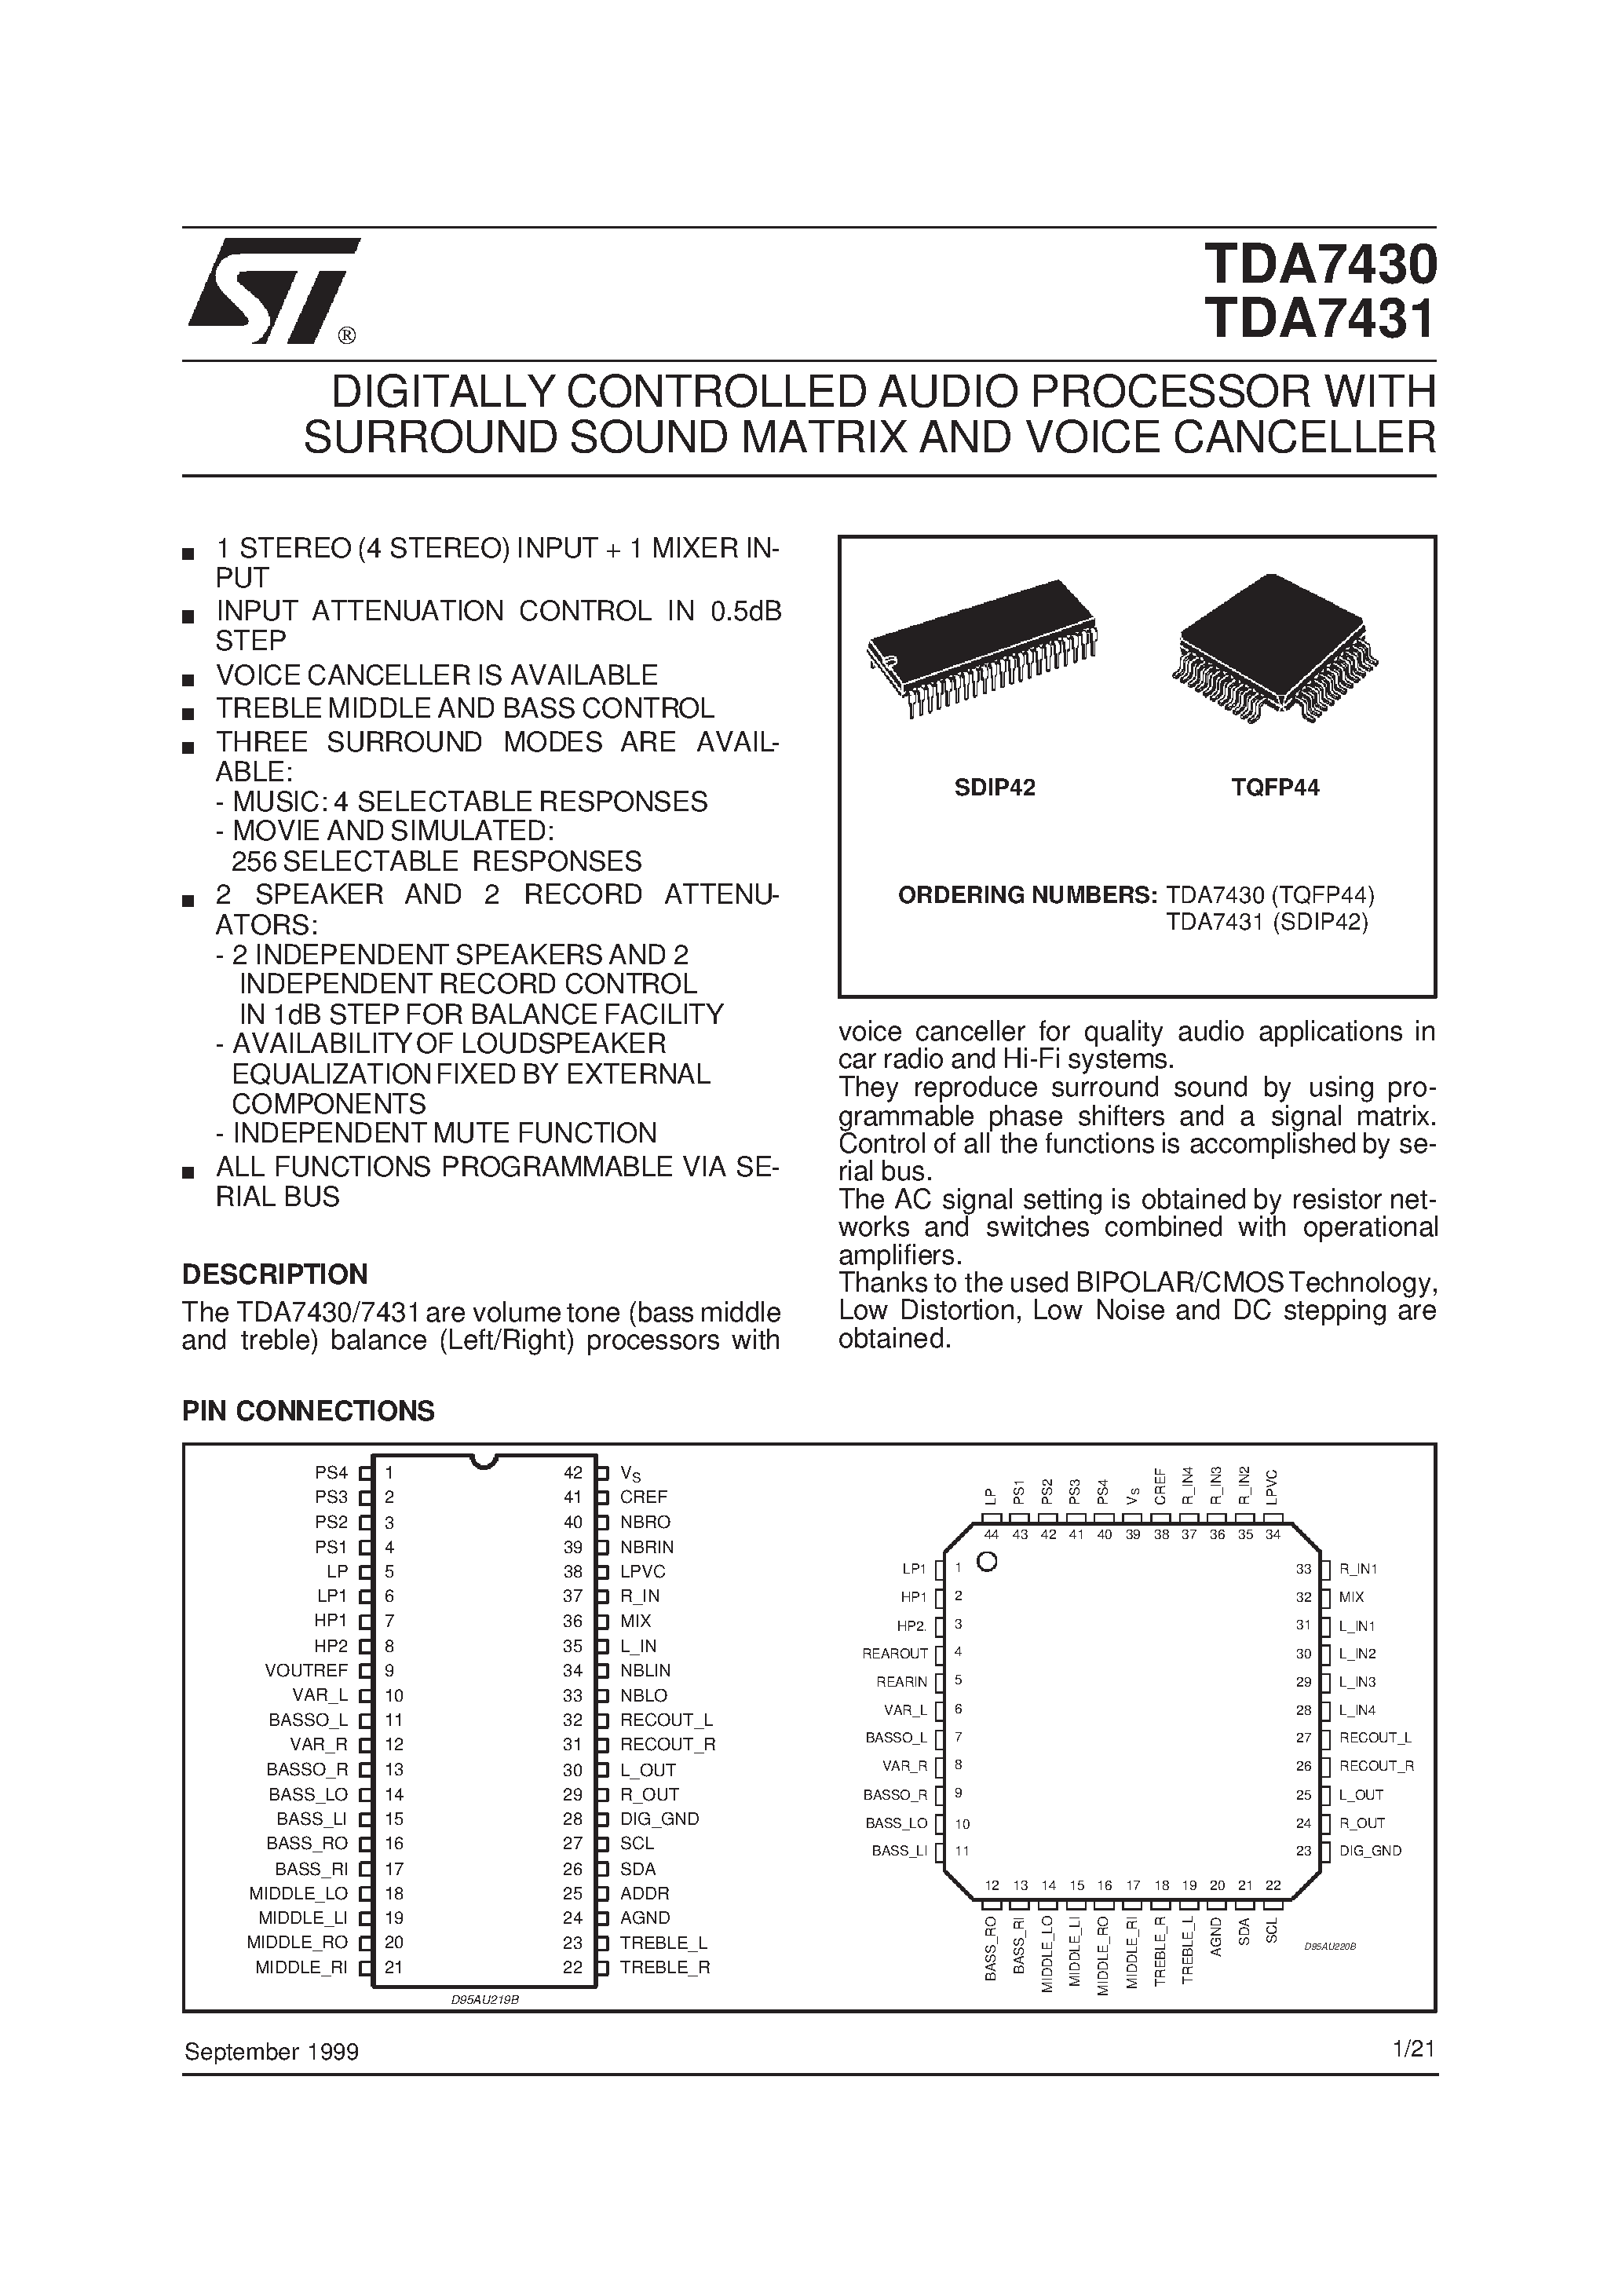 Datasheet 7431 - DIGITALLY CONTROLLED AUDIO PROCESSOR WITH SURROUND SOUND MATRIX AND VOICE CANCELLER page 1